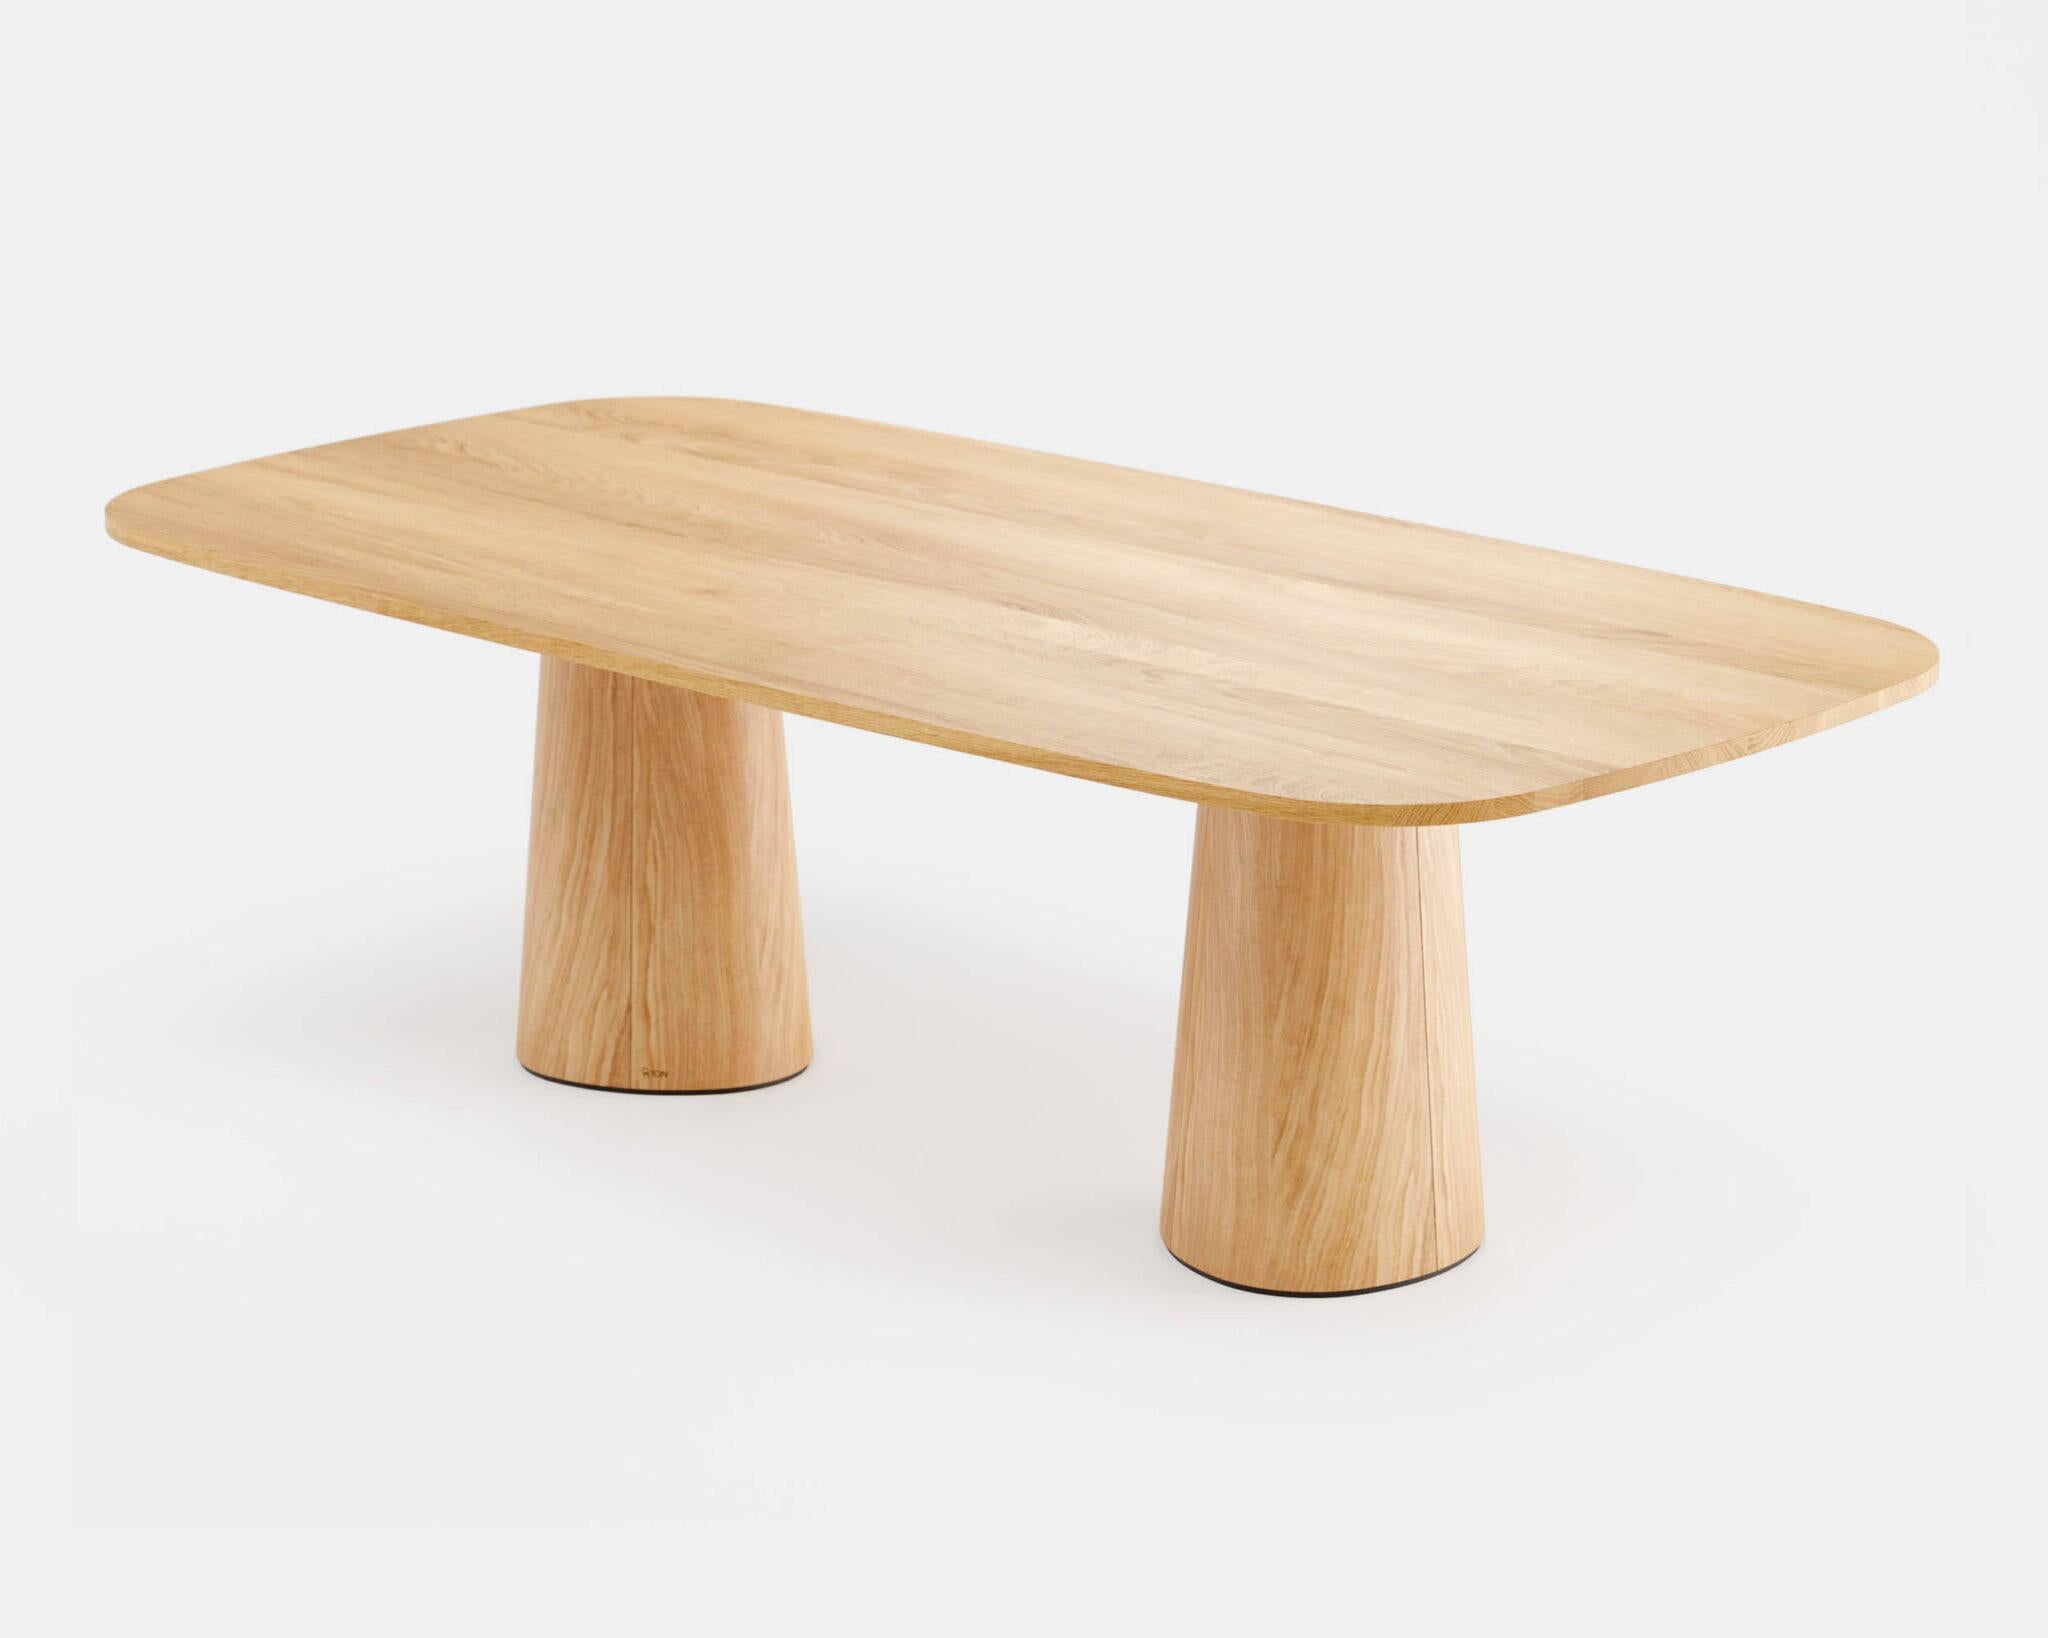 Dining Table POV 464 signed by TON & Kashkash studio

Top shape:
Oval, rectangular, or round rectangular

Wood types:
Solid oak or American walnut (more wood types and stains available)

Quoted model: Rectangular or round rectangular top, solid oak